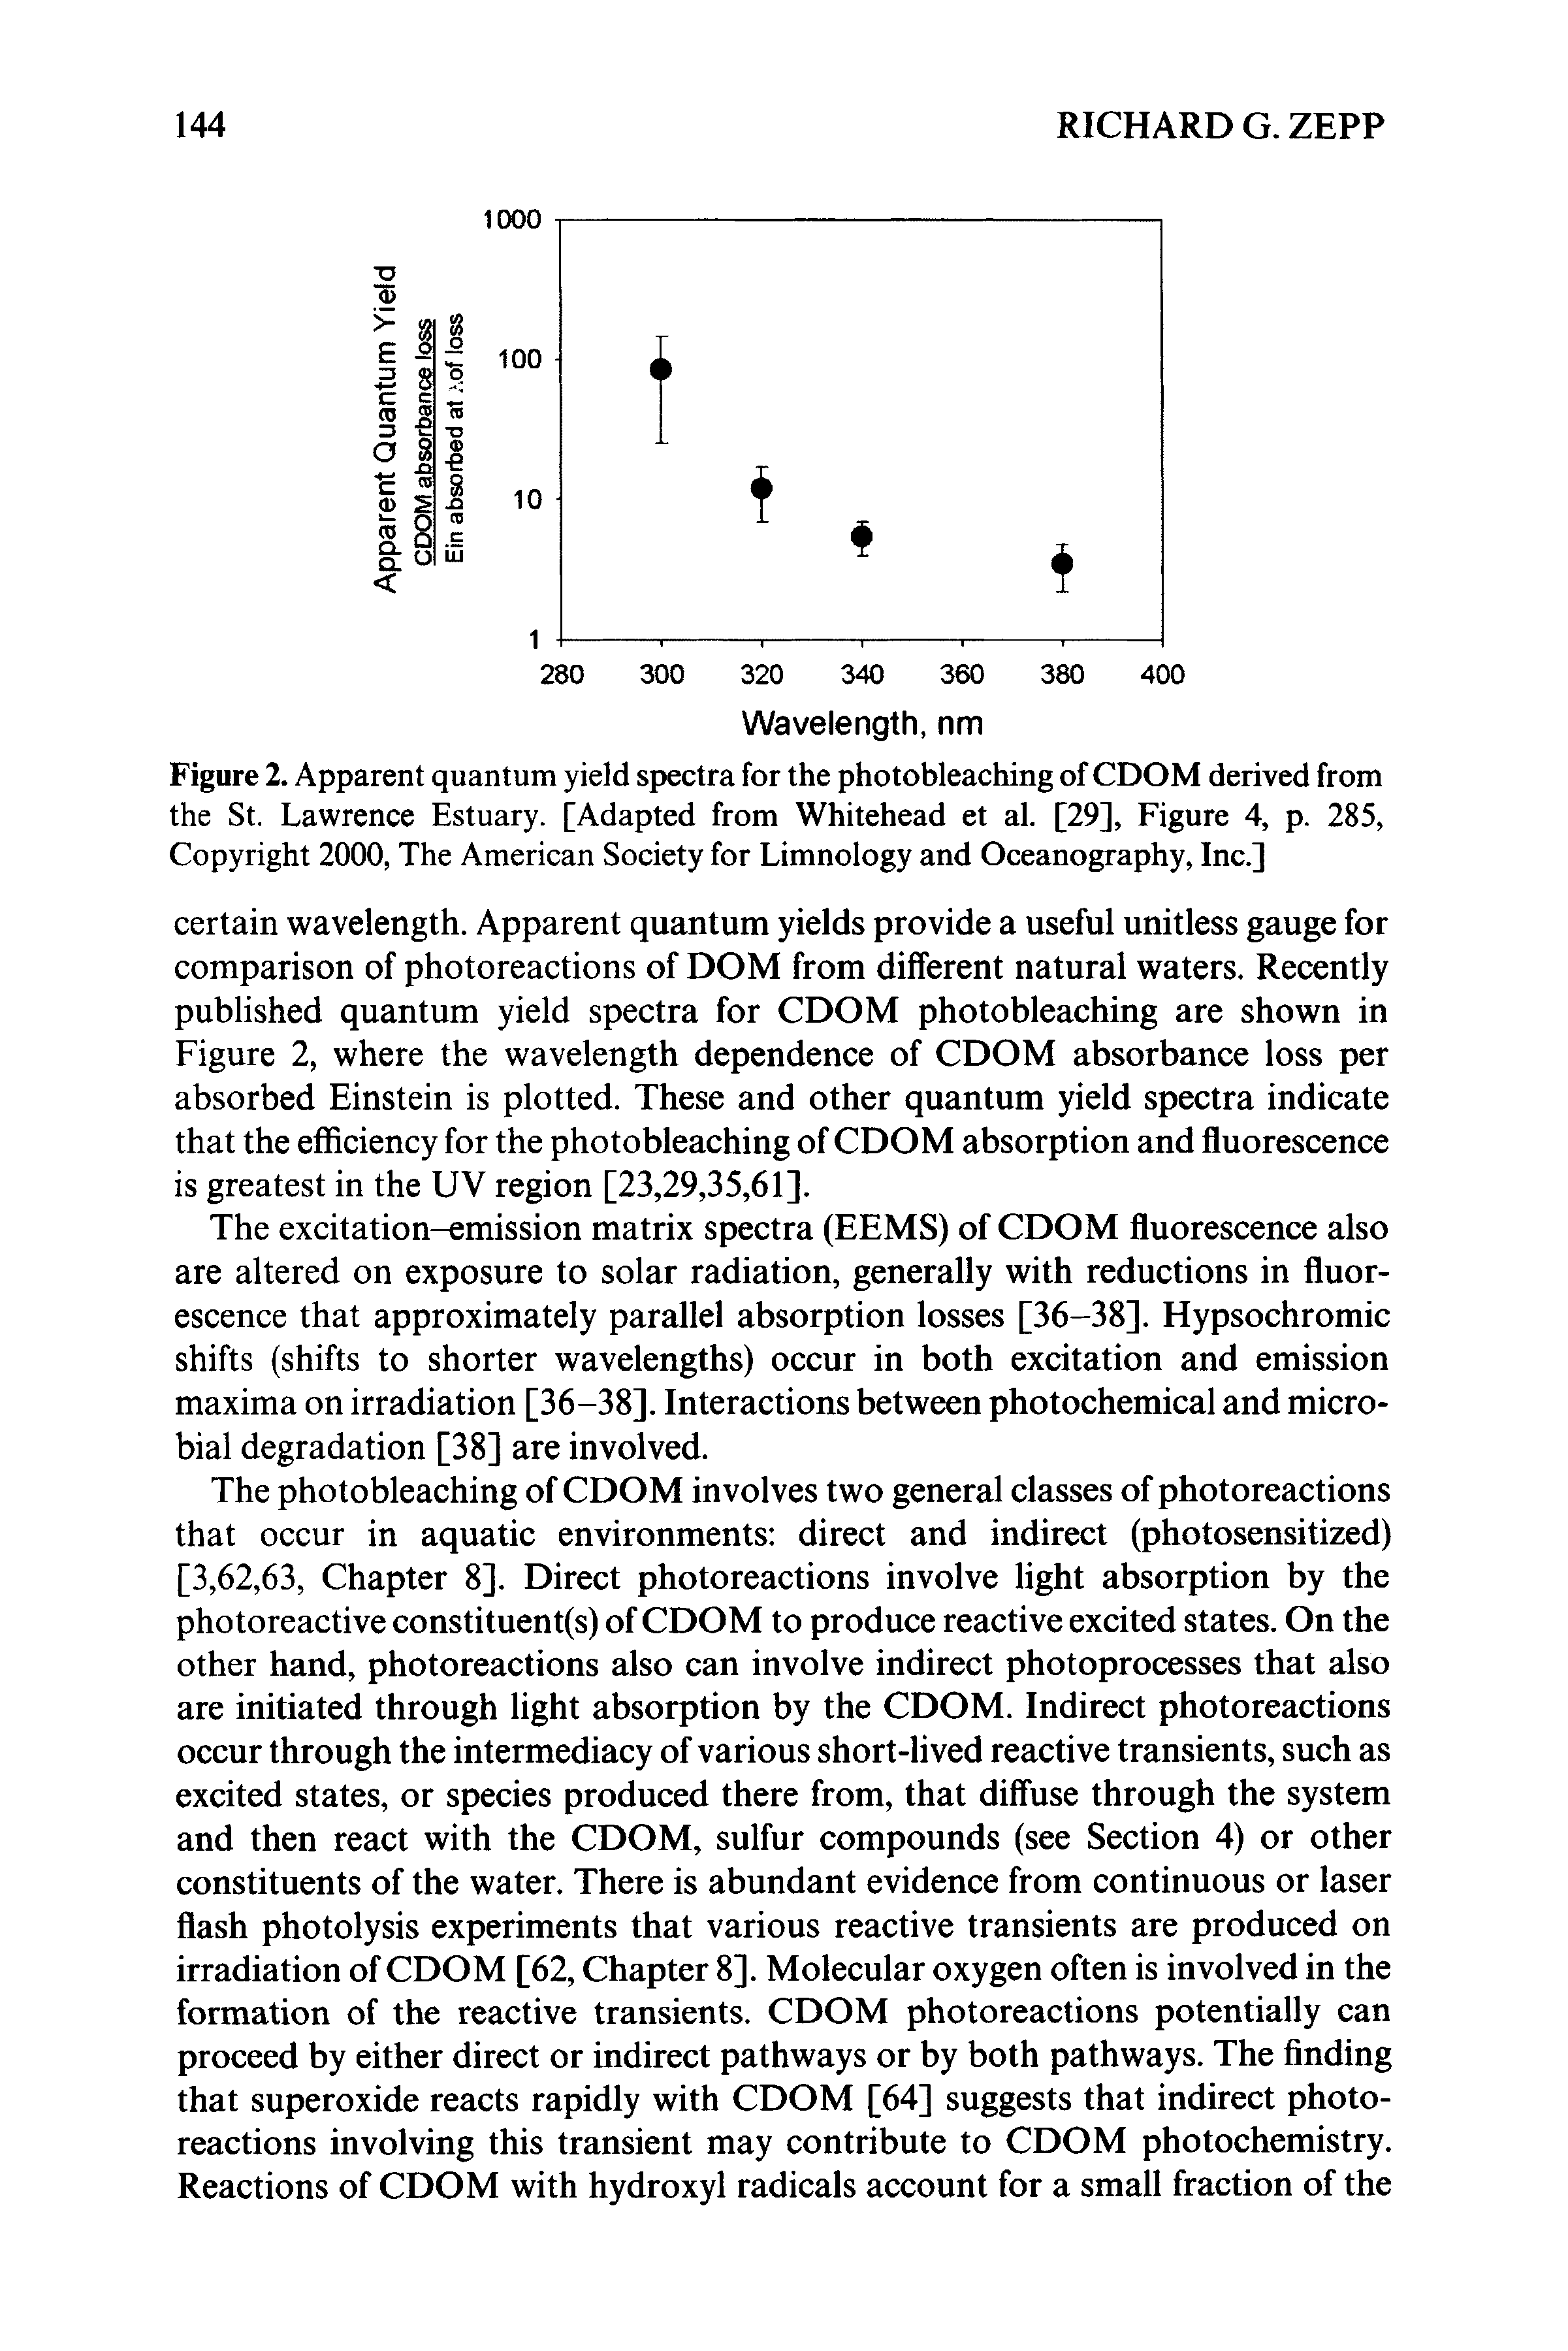 Figure 2. Apparent quantum yield spectra for the photobleaching of CDOM derived from the St. Lawrence Estuary. [Adapted from Whitehead et al. [29], Figure 4, p. 285, Copyright 2000, The American Society for Limnology and Oceanography, Inc.]...